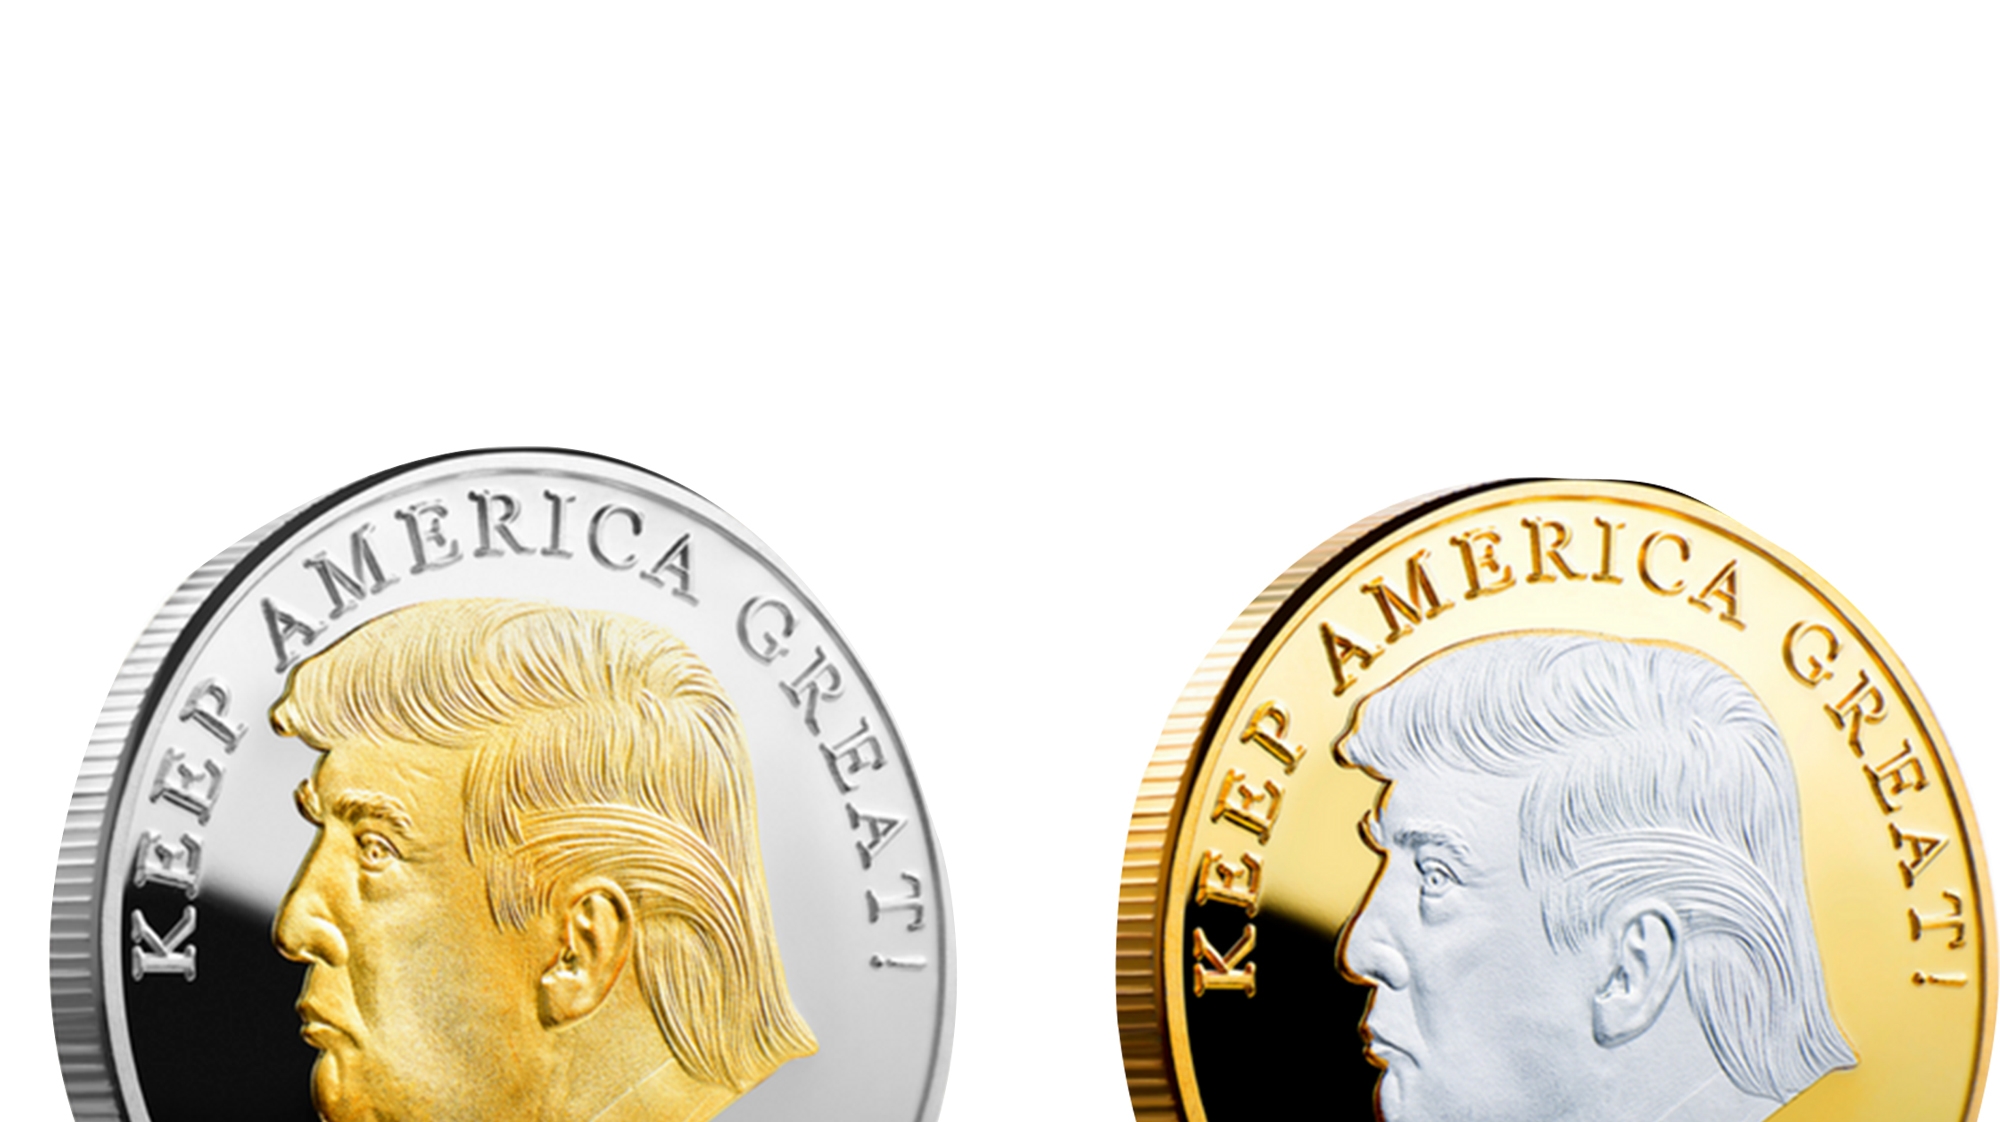 GOLD AND SILVER PLATED PRESIDENT TRUMP 2020 COIN | AnyImage.io